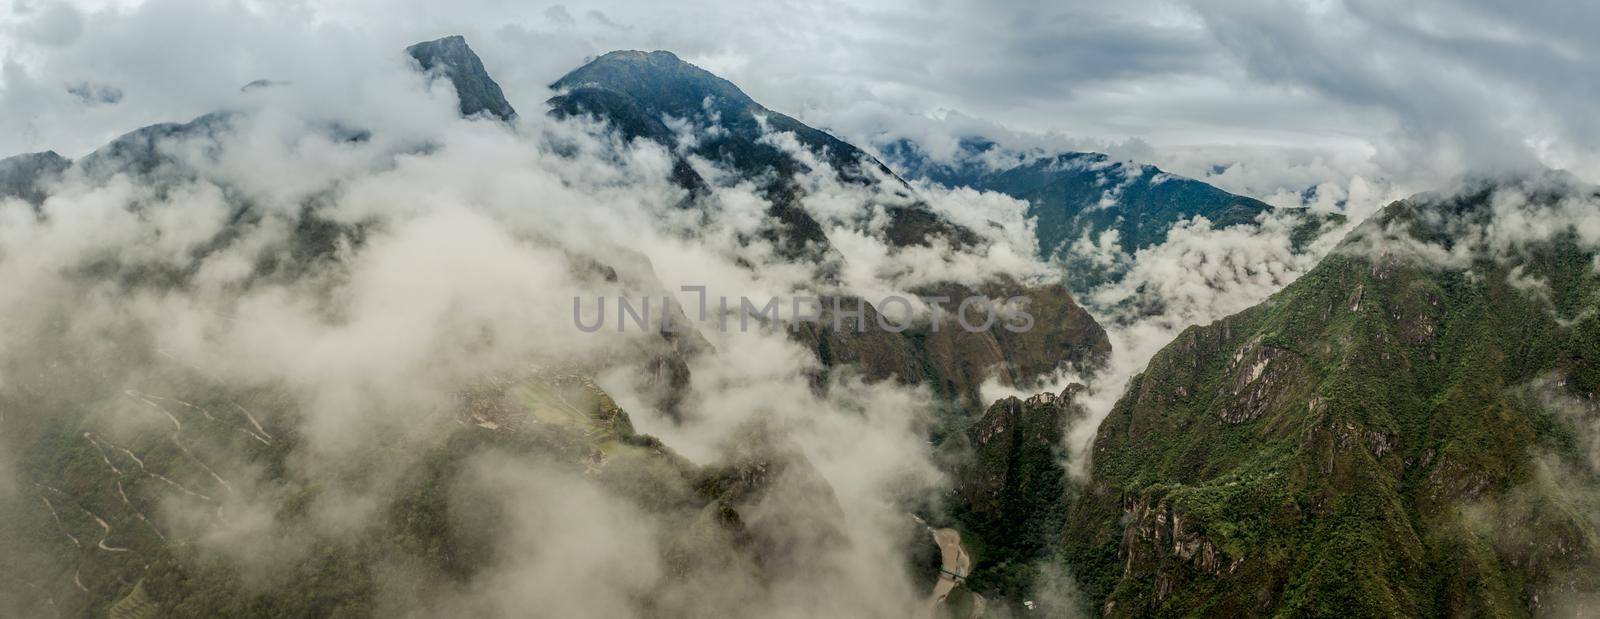 Aerial view of Machupicchu with clouds by tan4ikk1